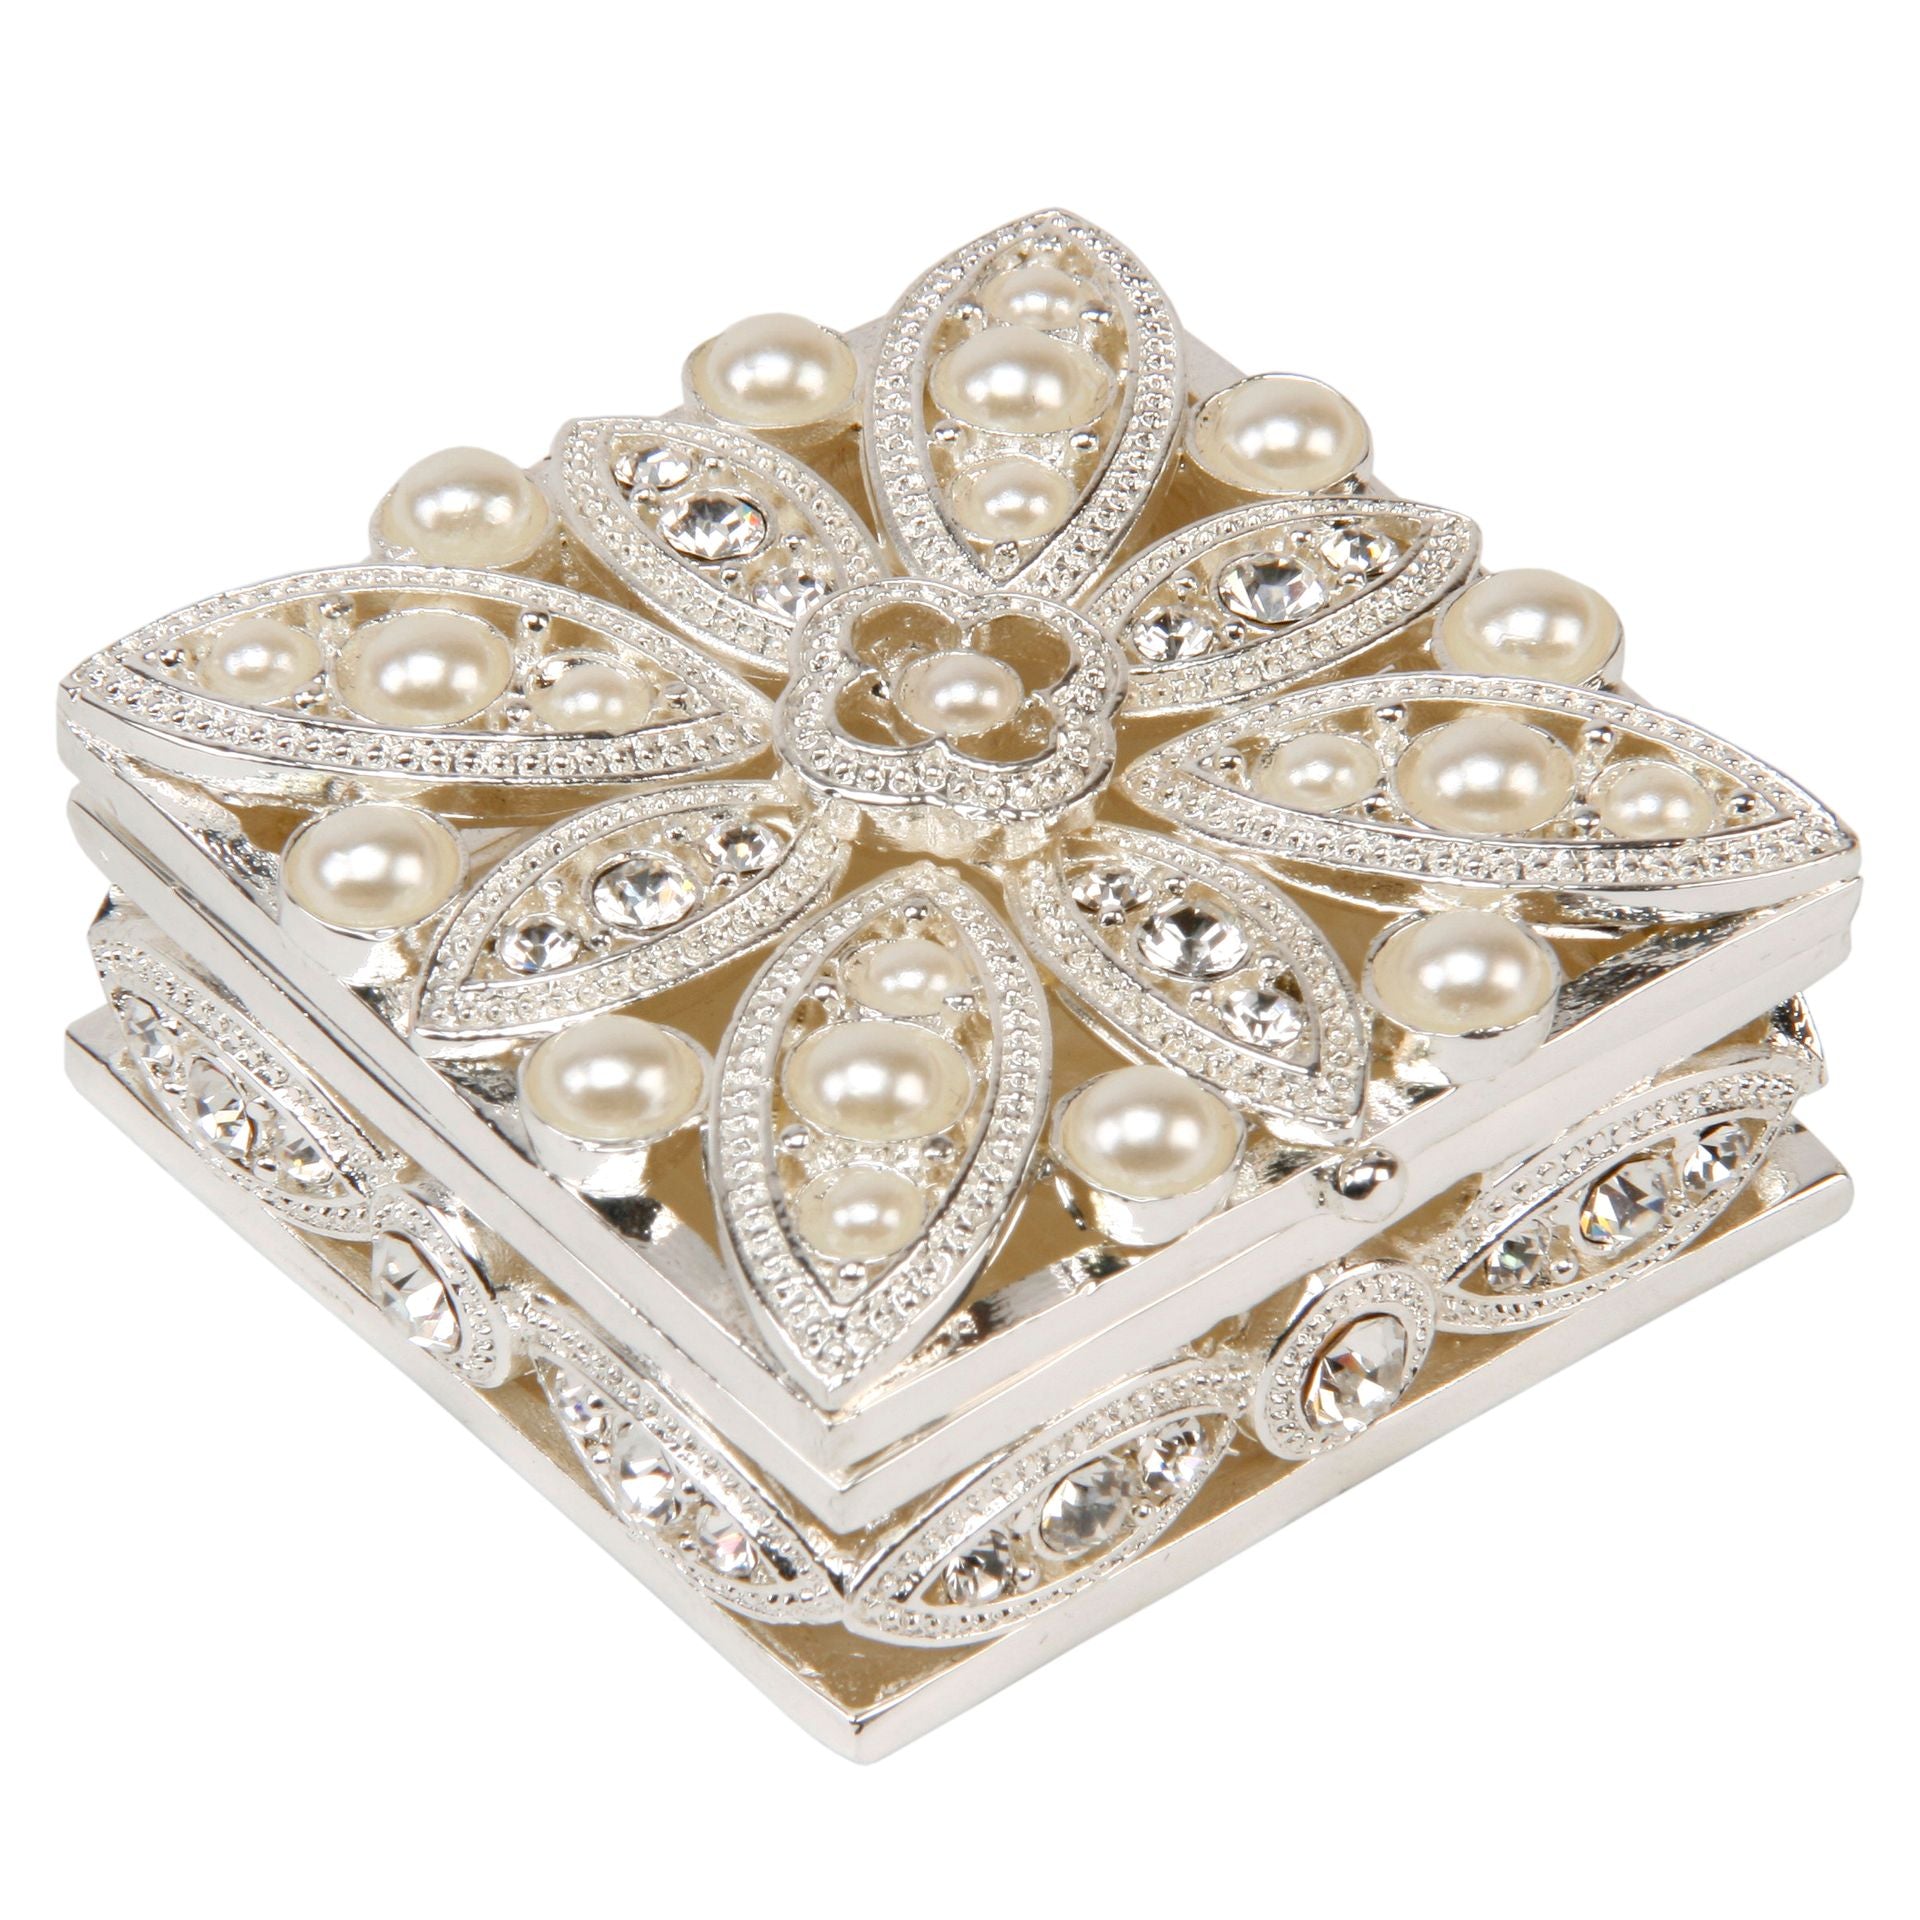 Silver-Plated Jewellery Box - Square